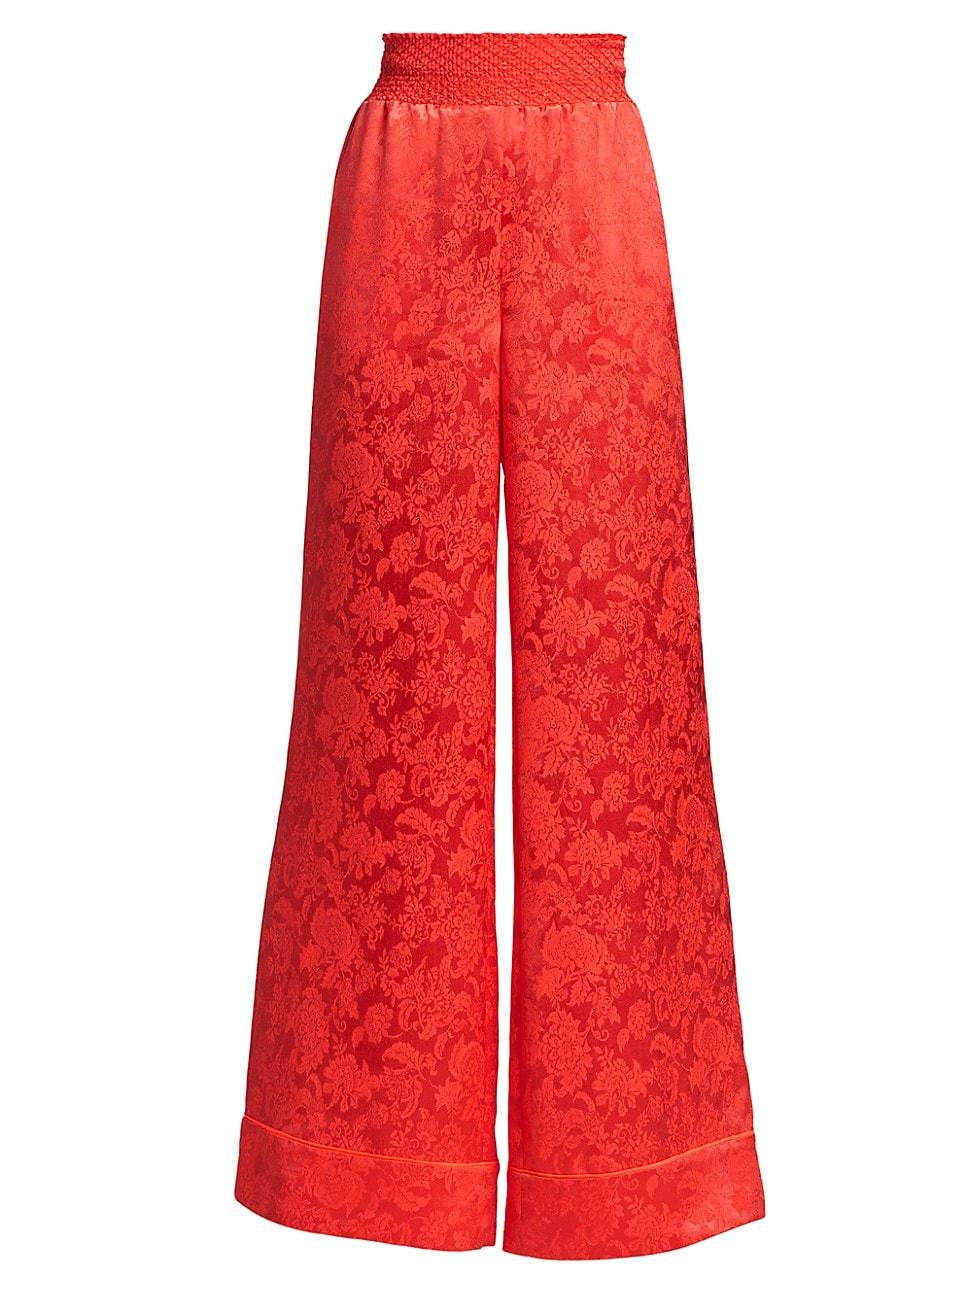 Alice + Olivia Willis Satin Wide-leg Pants in Red | Lyst